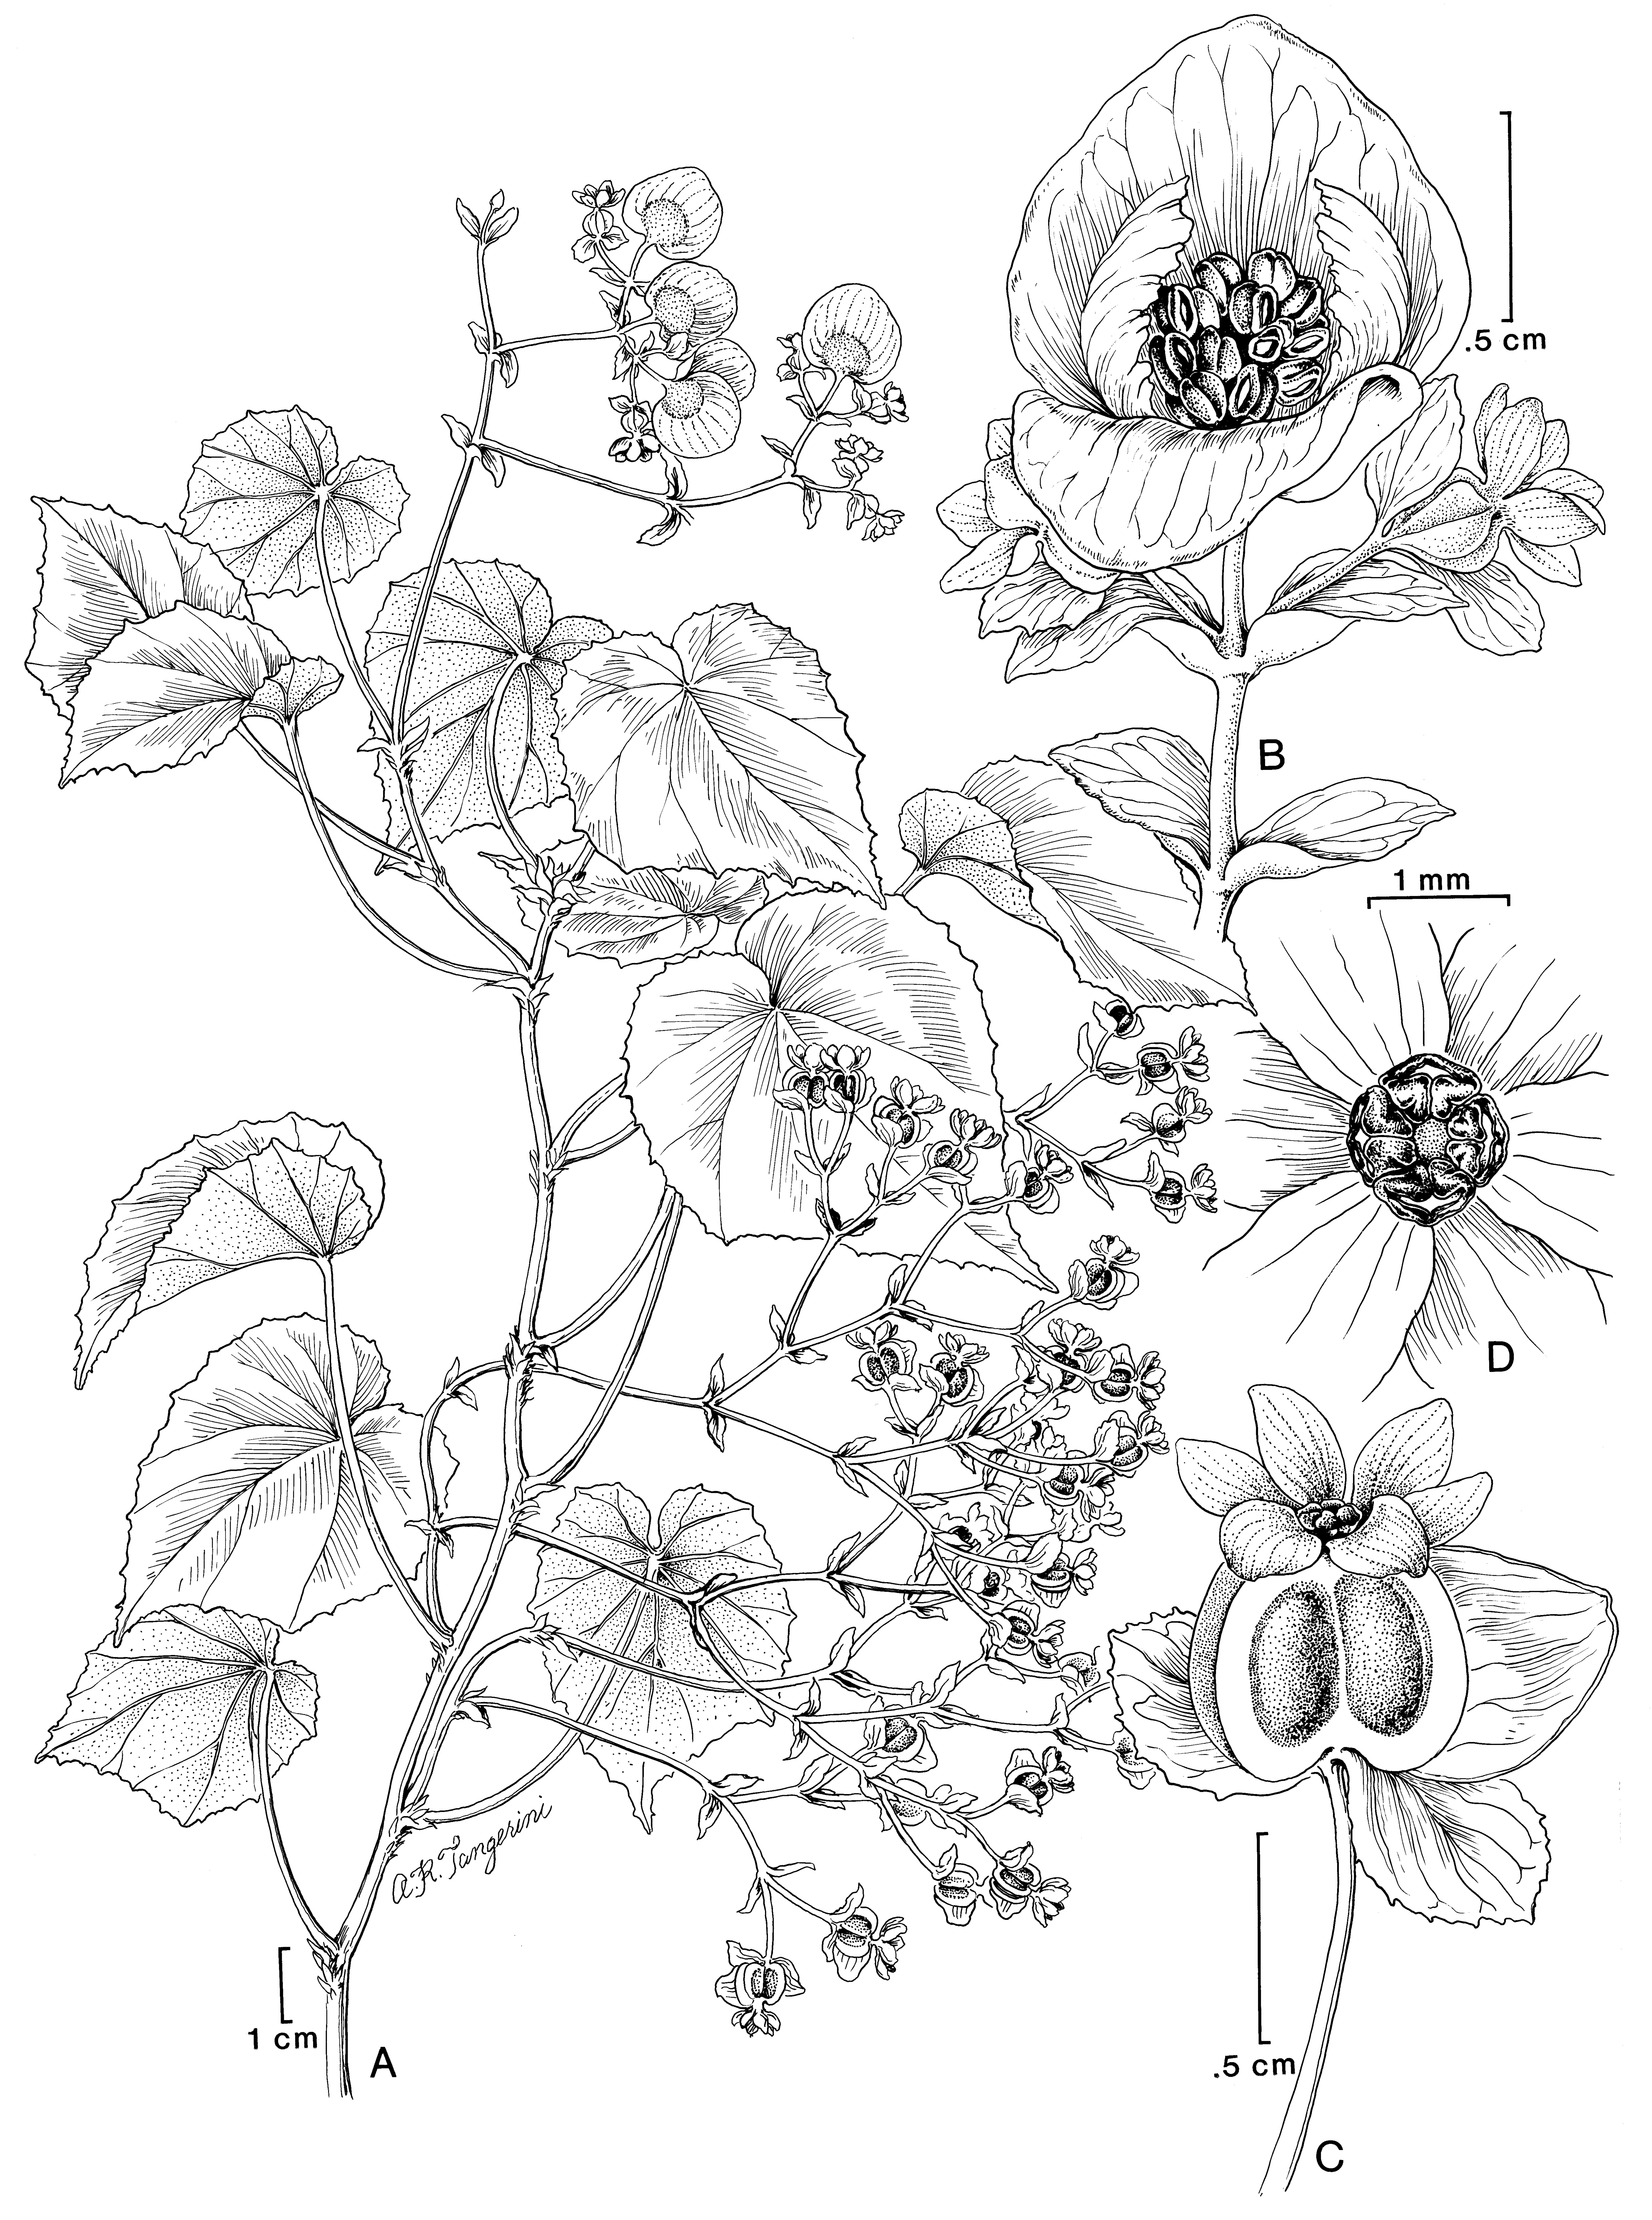 Line drawing of Begonia, showing imperfect flowers. Staminate flowers are filled with stamens, and carpellate flowers have expanded, inferior ovaries.